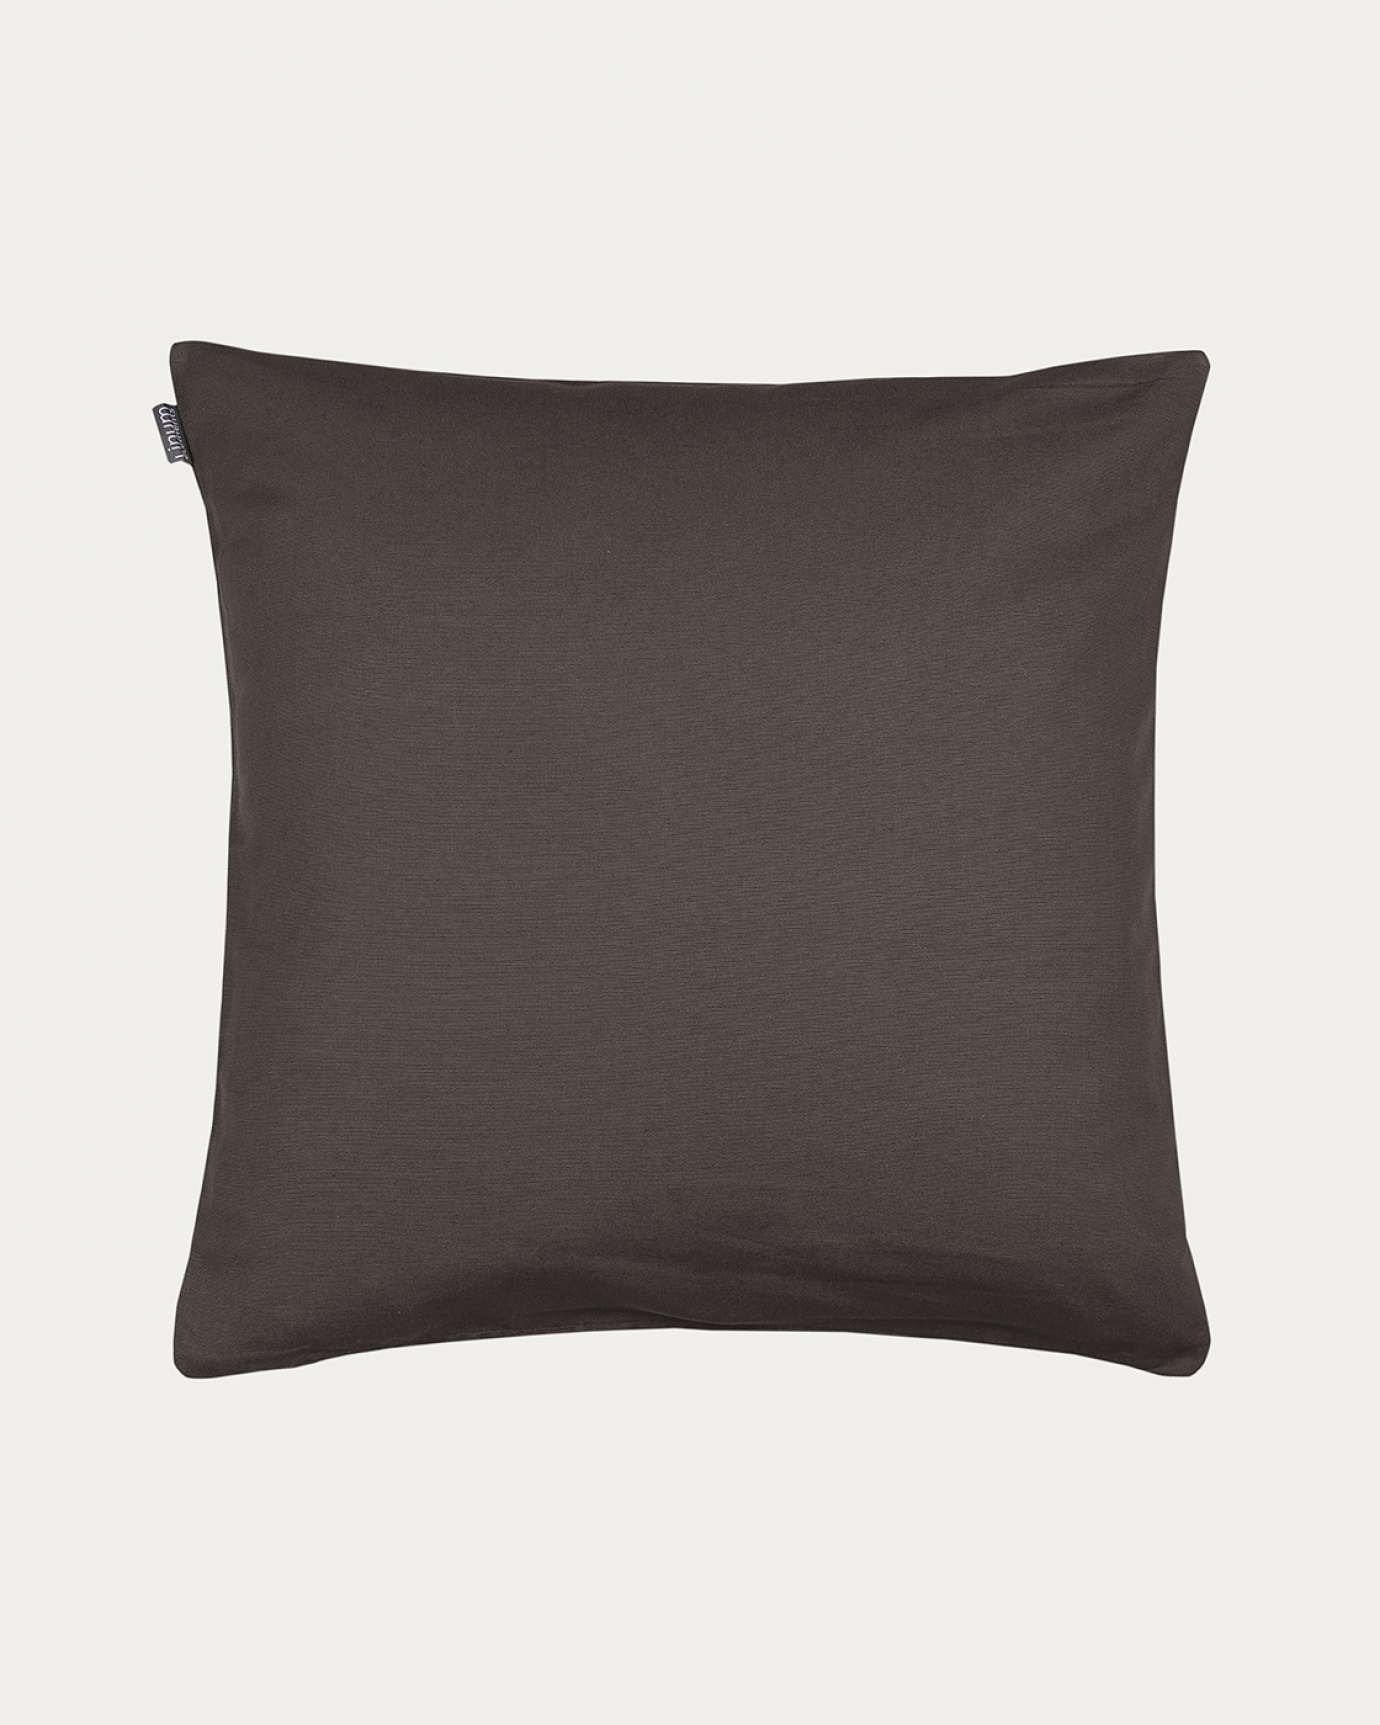 Product image buffalo brown ANNABELL cushion cover made of soft cotton from LINUM DESIGN. Size 50x50 cm.